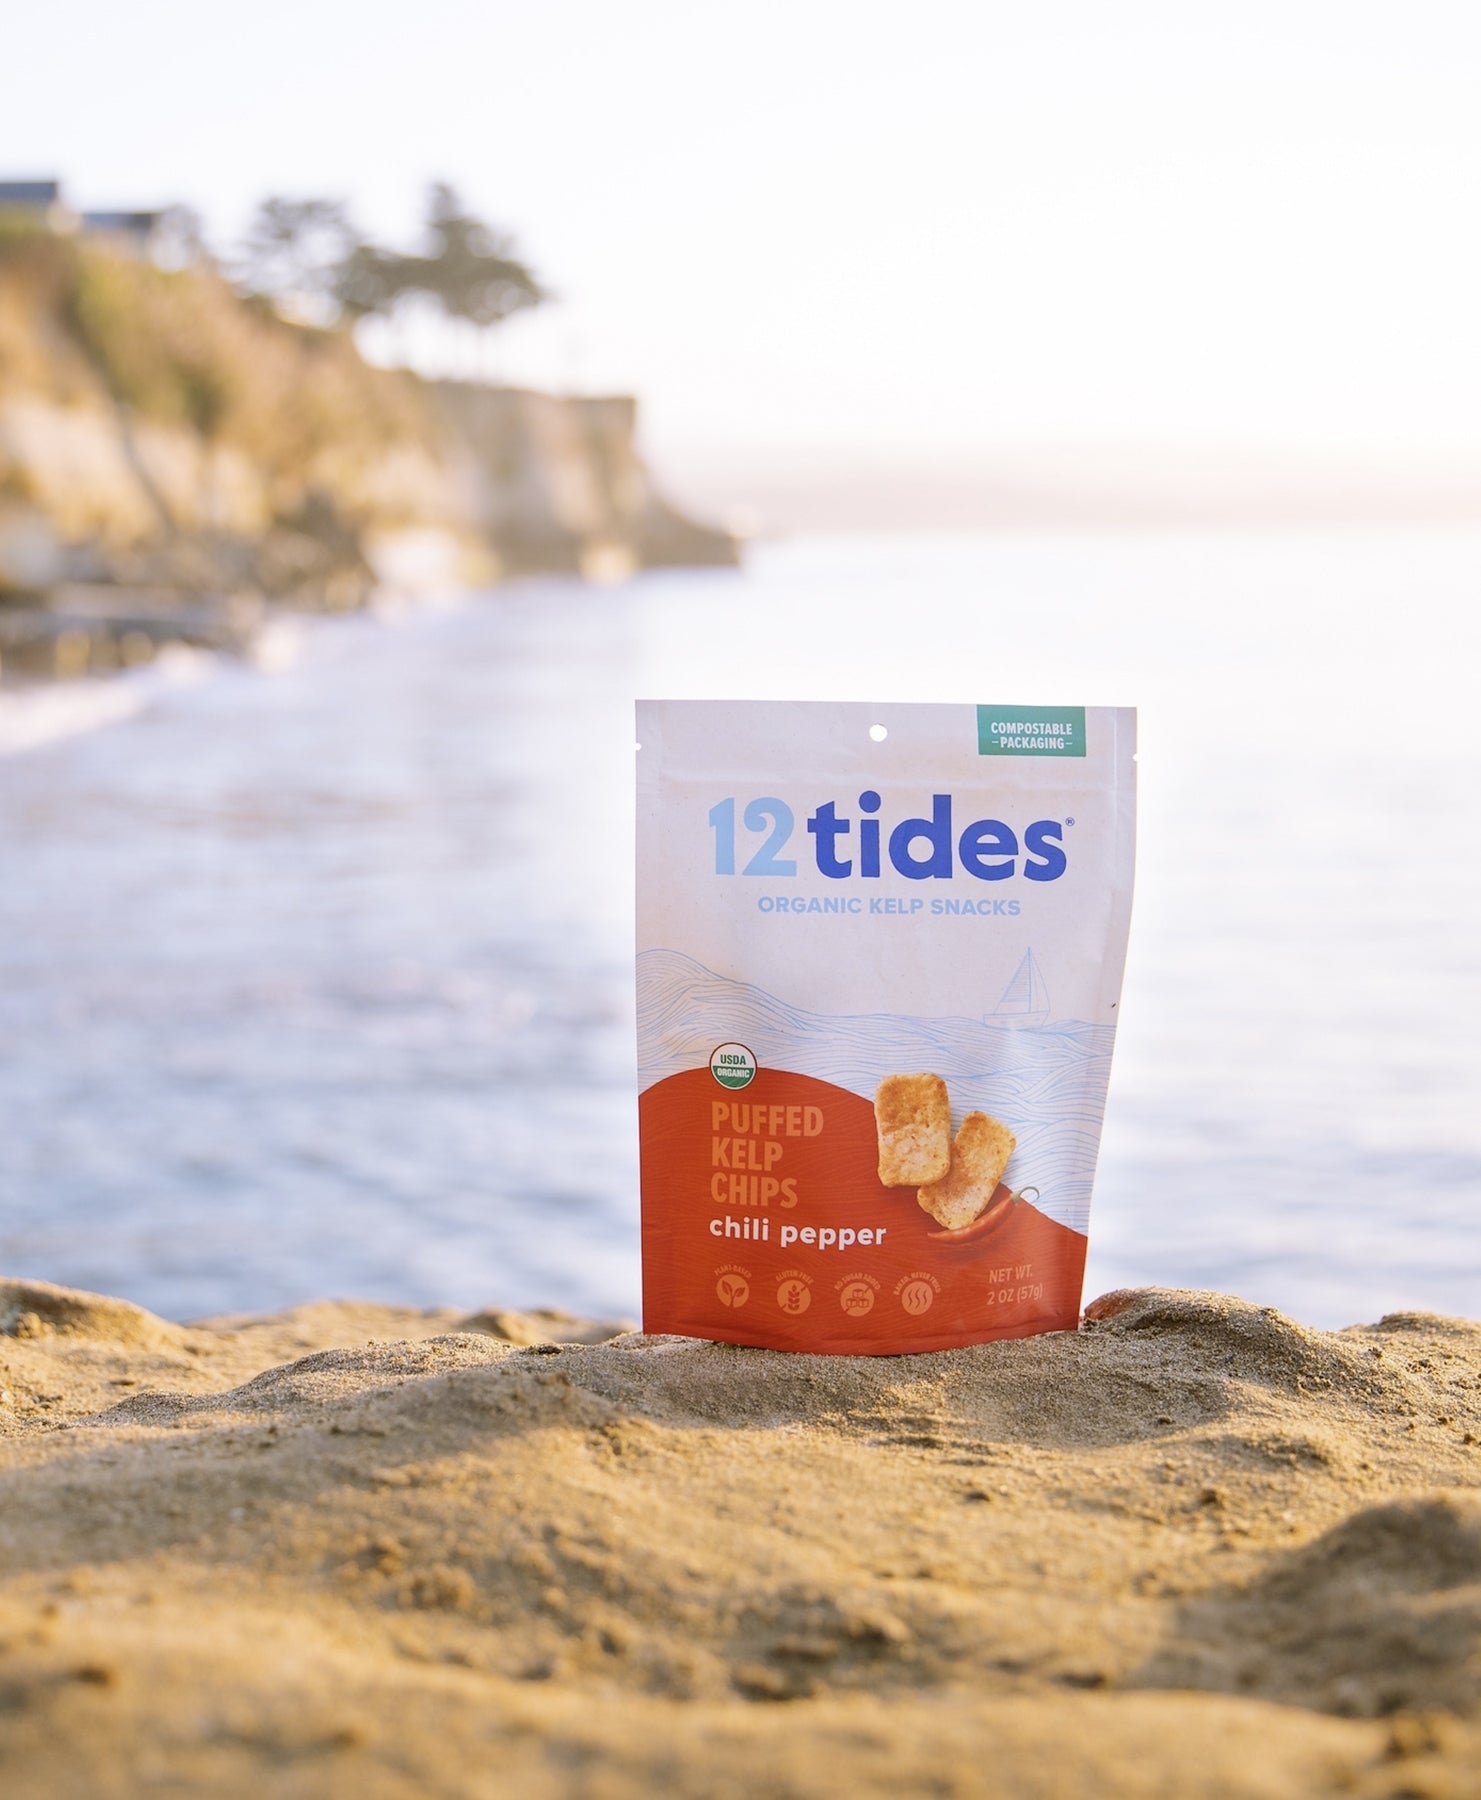 Chili Pepper Puffed Kelp Chips - Lifestyle at the beach